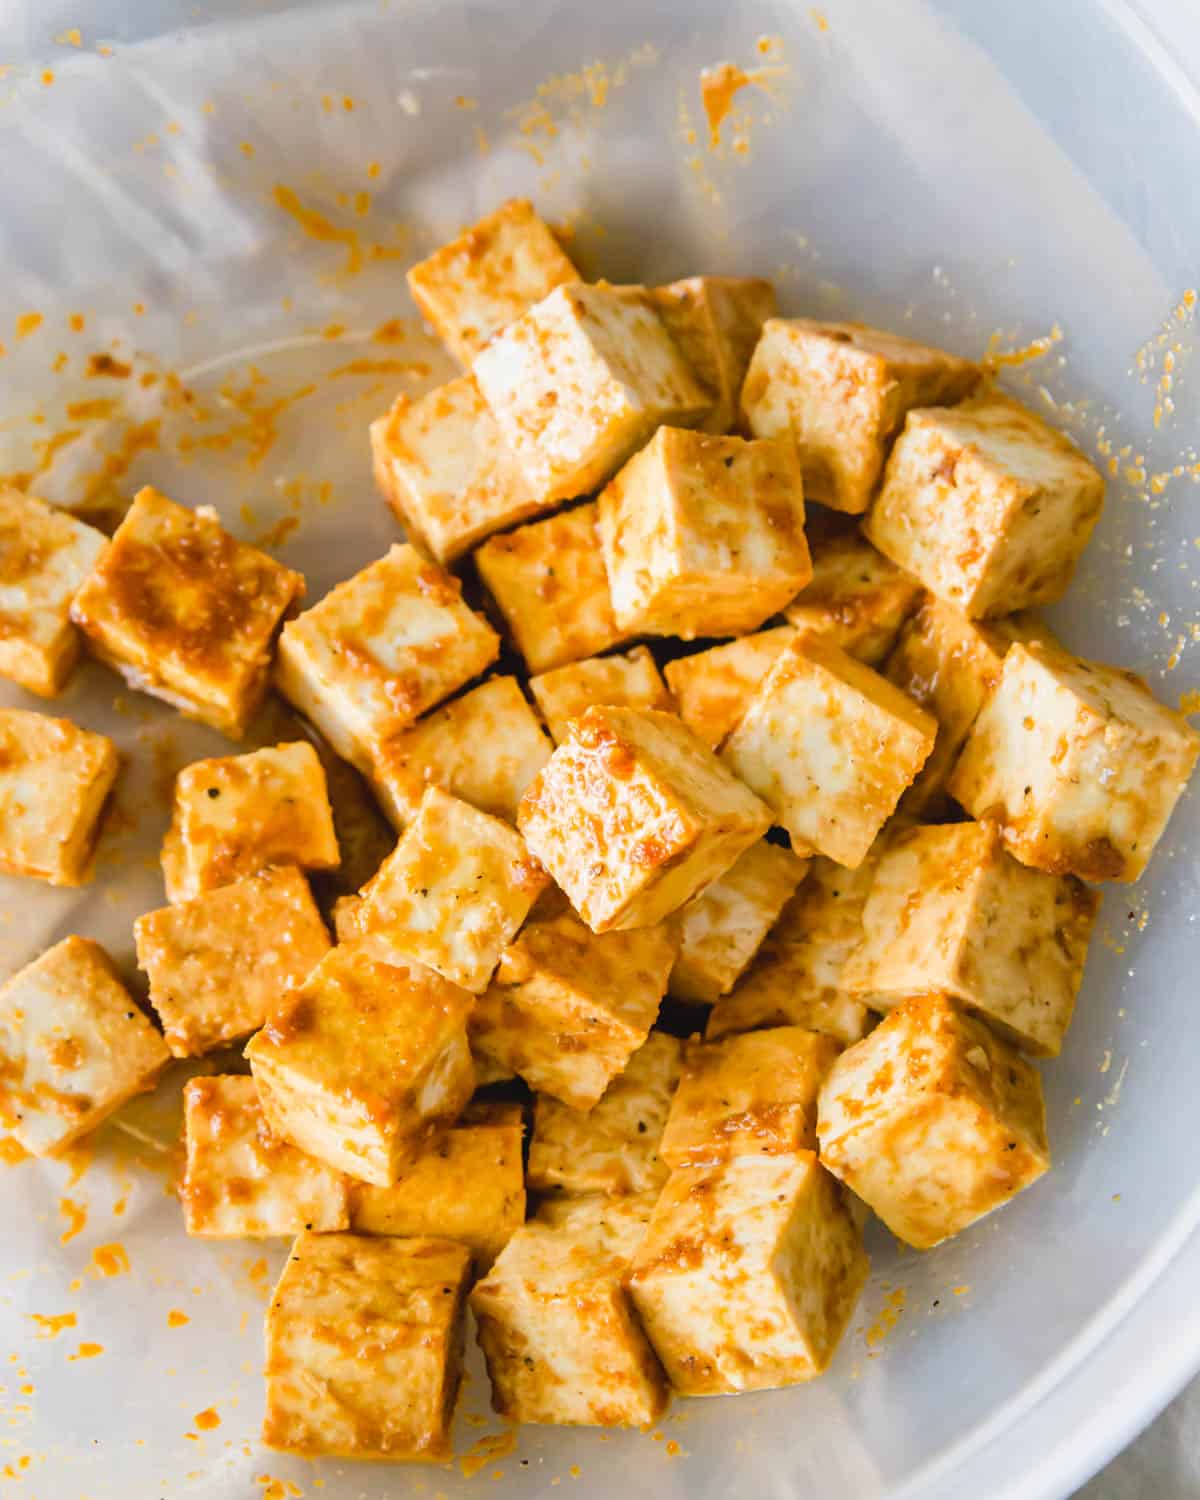 Pressed and cubed tofu in a quick and easy marinade before air frying.